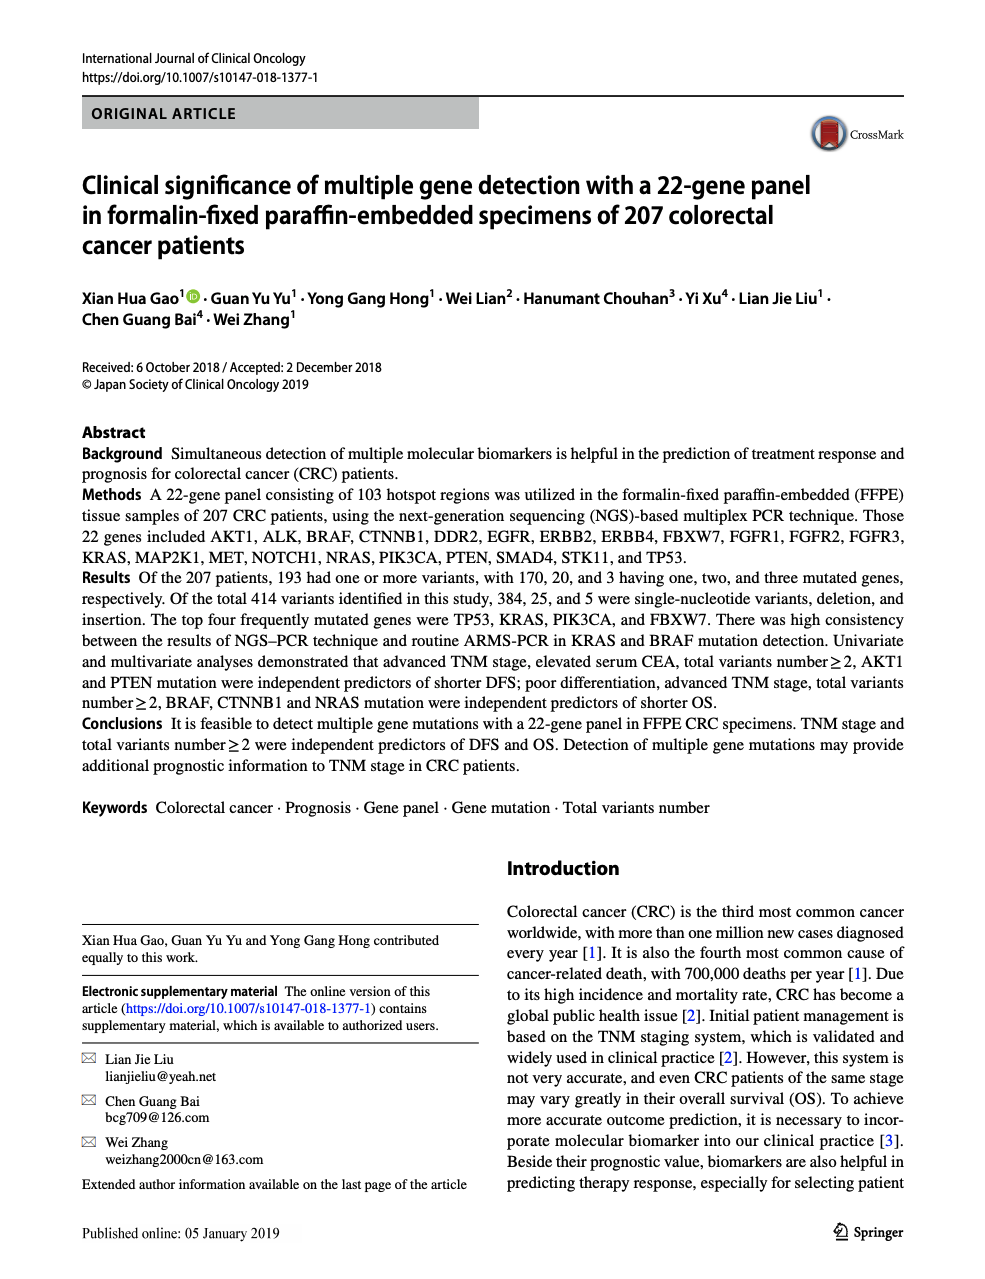 Screenshot of the first page of the article entitled "Clinical significance of multiple gene detection with a 22-gene panel in formalin-fixed paraffin-embedded specimens of 207 colorectal cancer patients